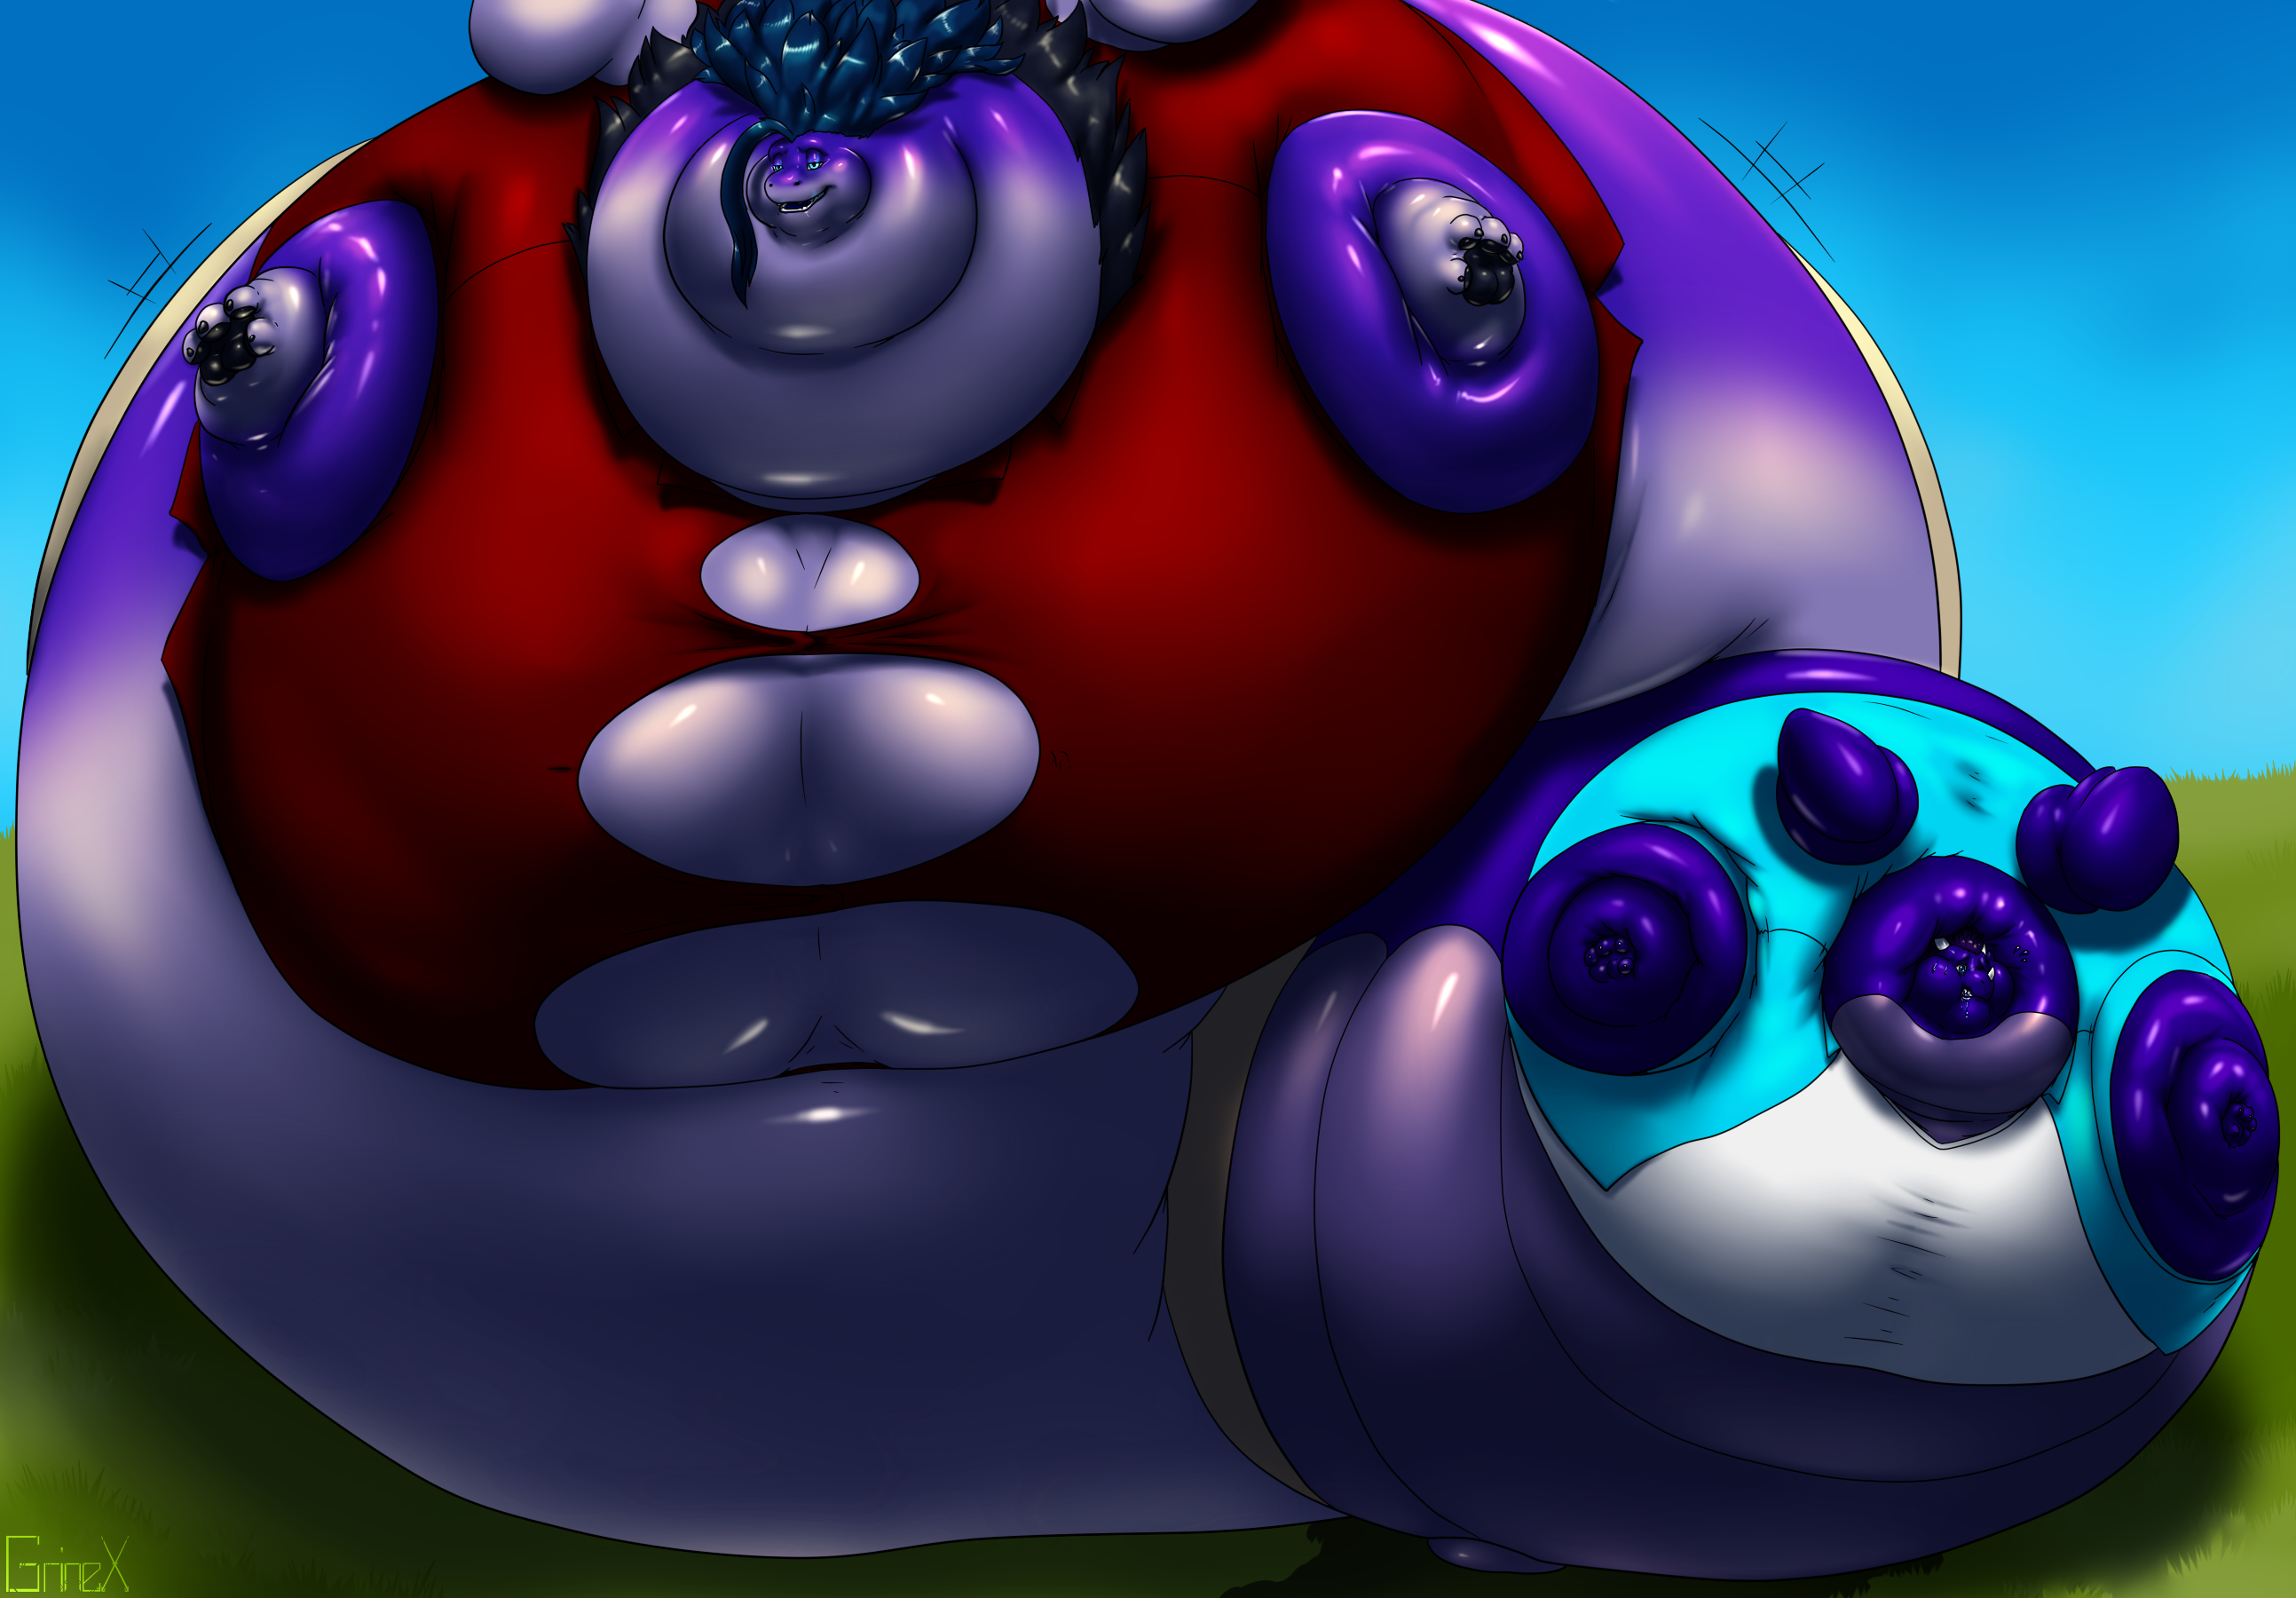 Blueberry Squishing a Blueberry. 